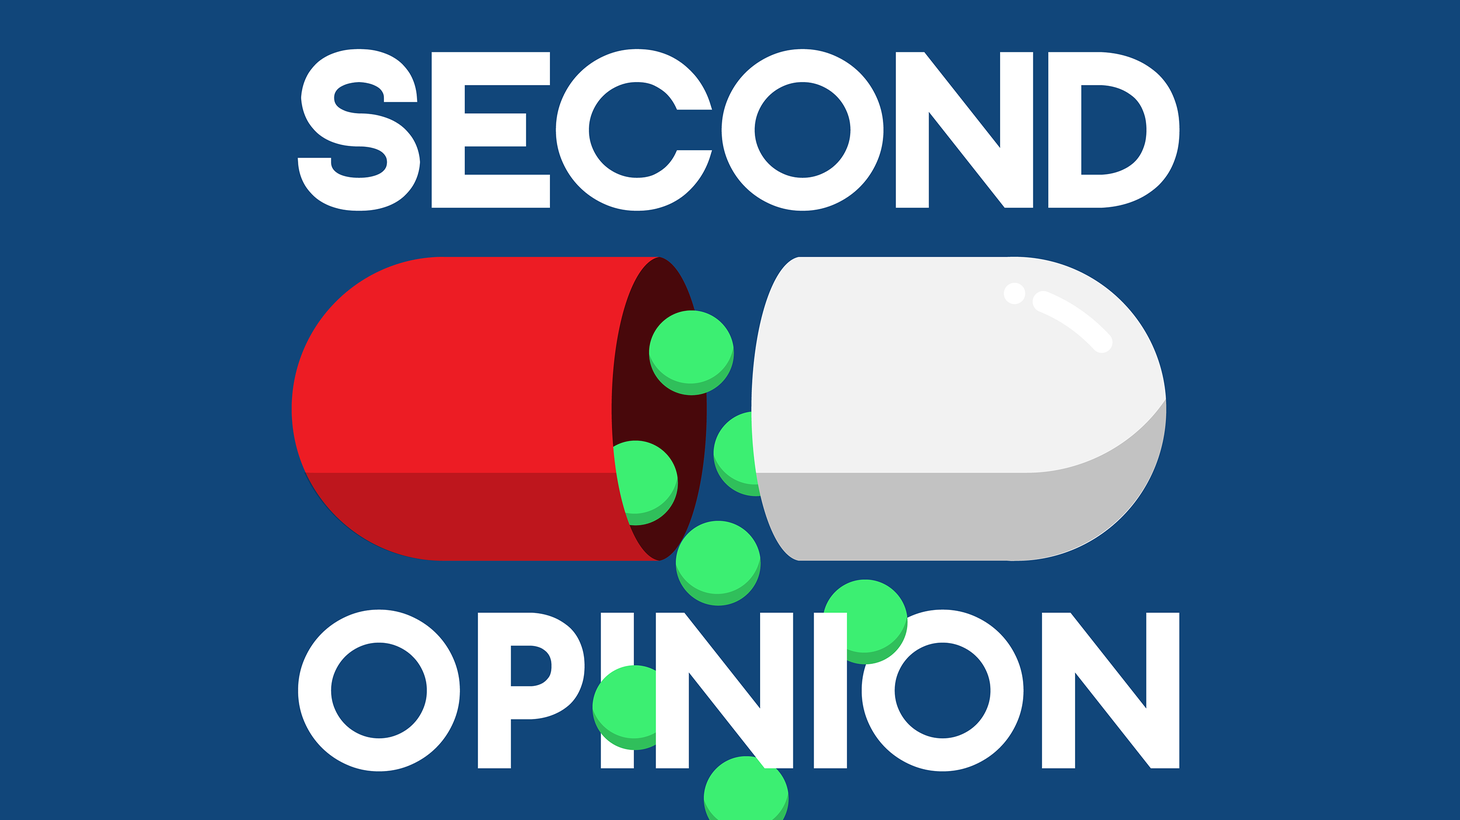 Why do people require different doses of pain medication for similar problems?